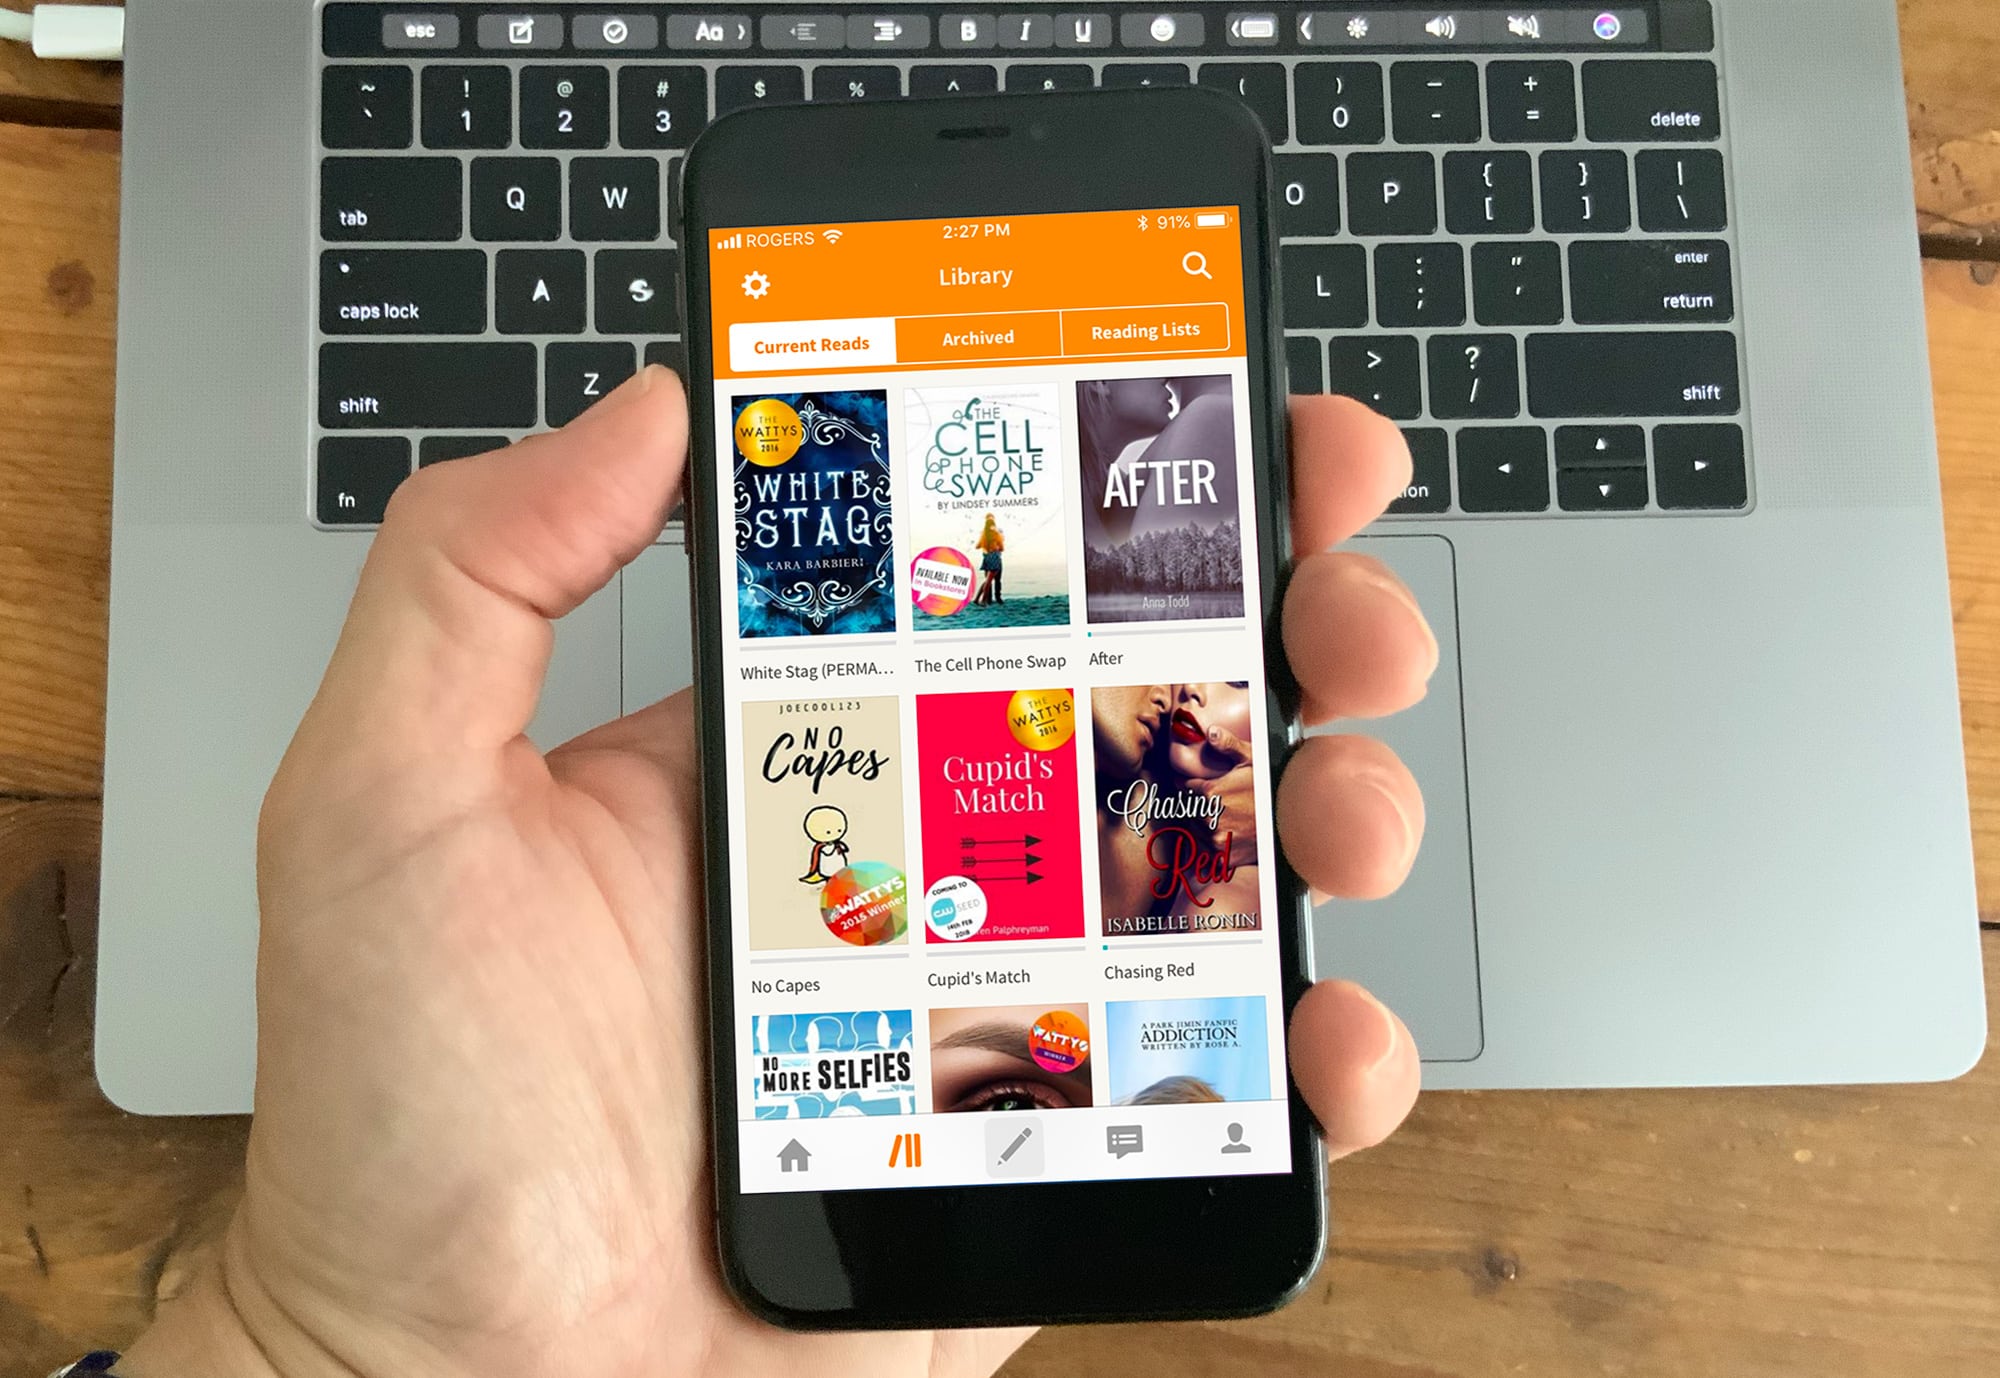 Wattpad: The social reading and writing app that’s transforming the entertainment industry